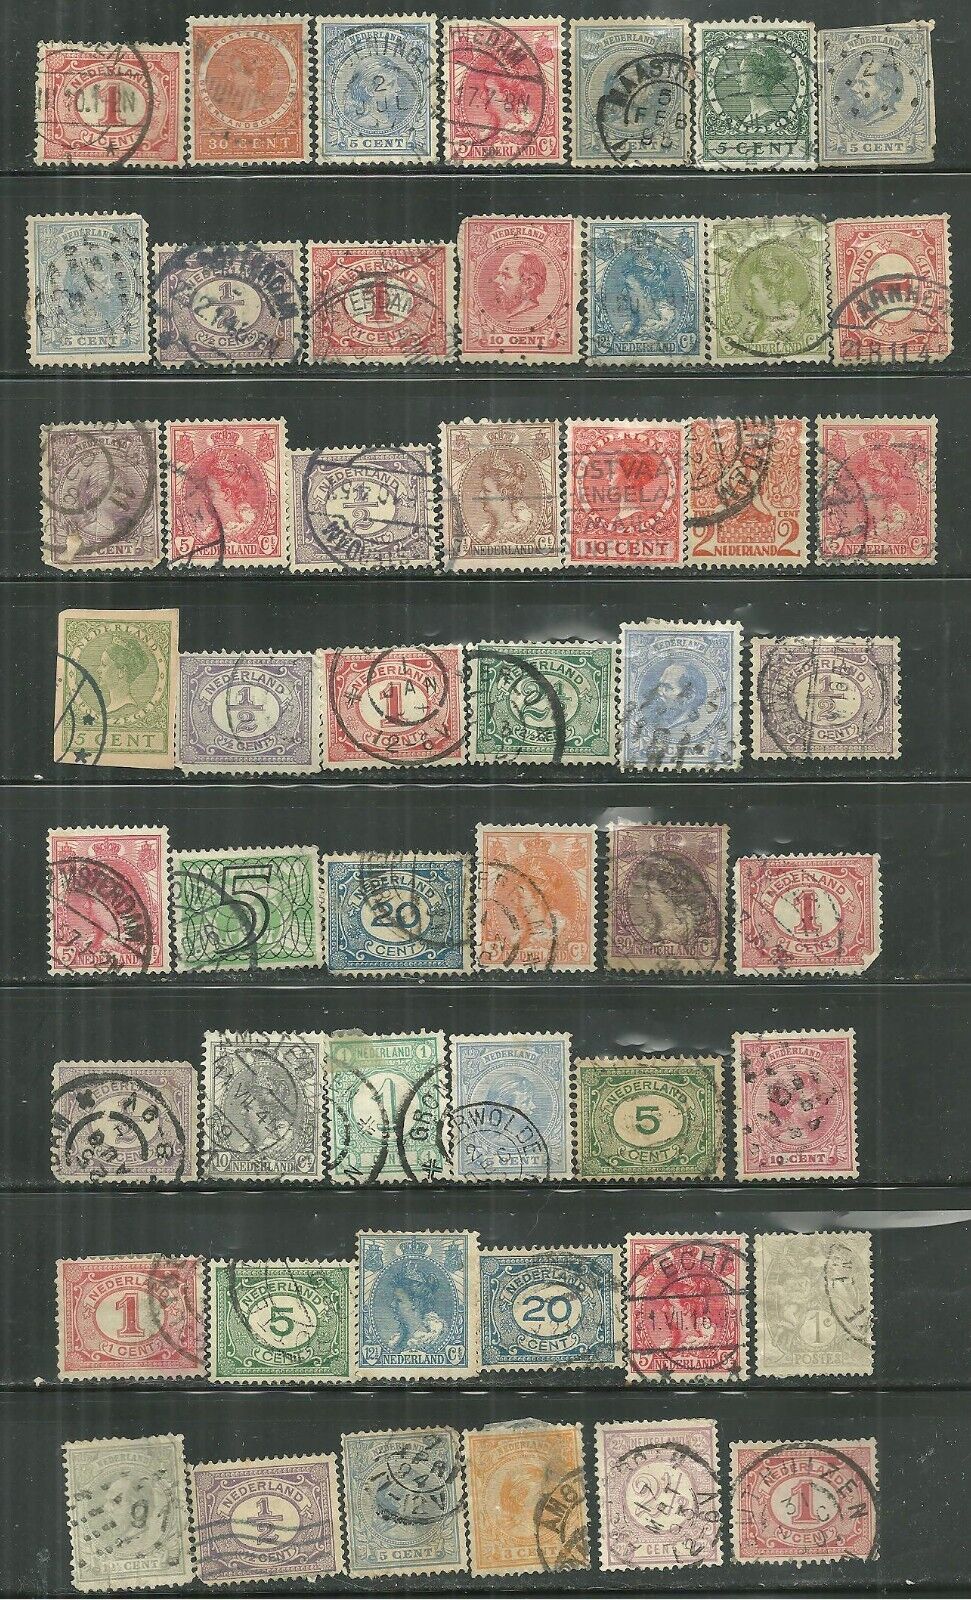 NETHERLANDS LATE 19TH EARLY 20TH CENTURY USED LOT OF 51 UNSEARCHED #13